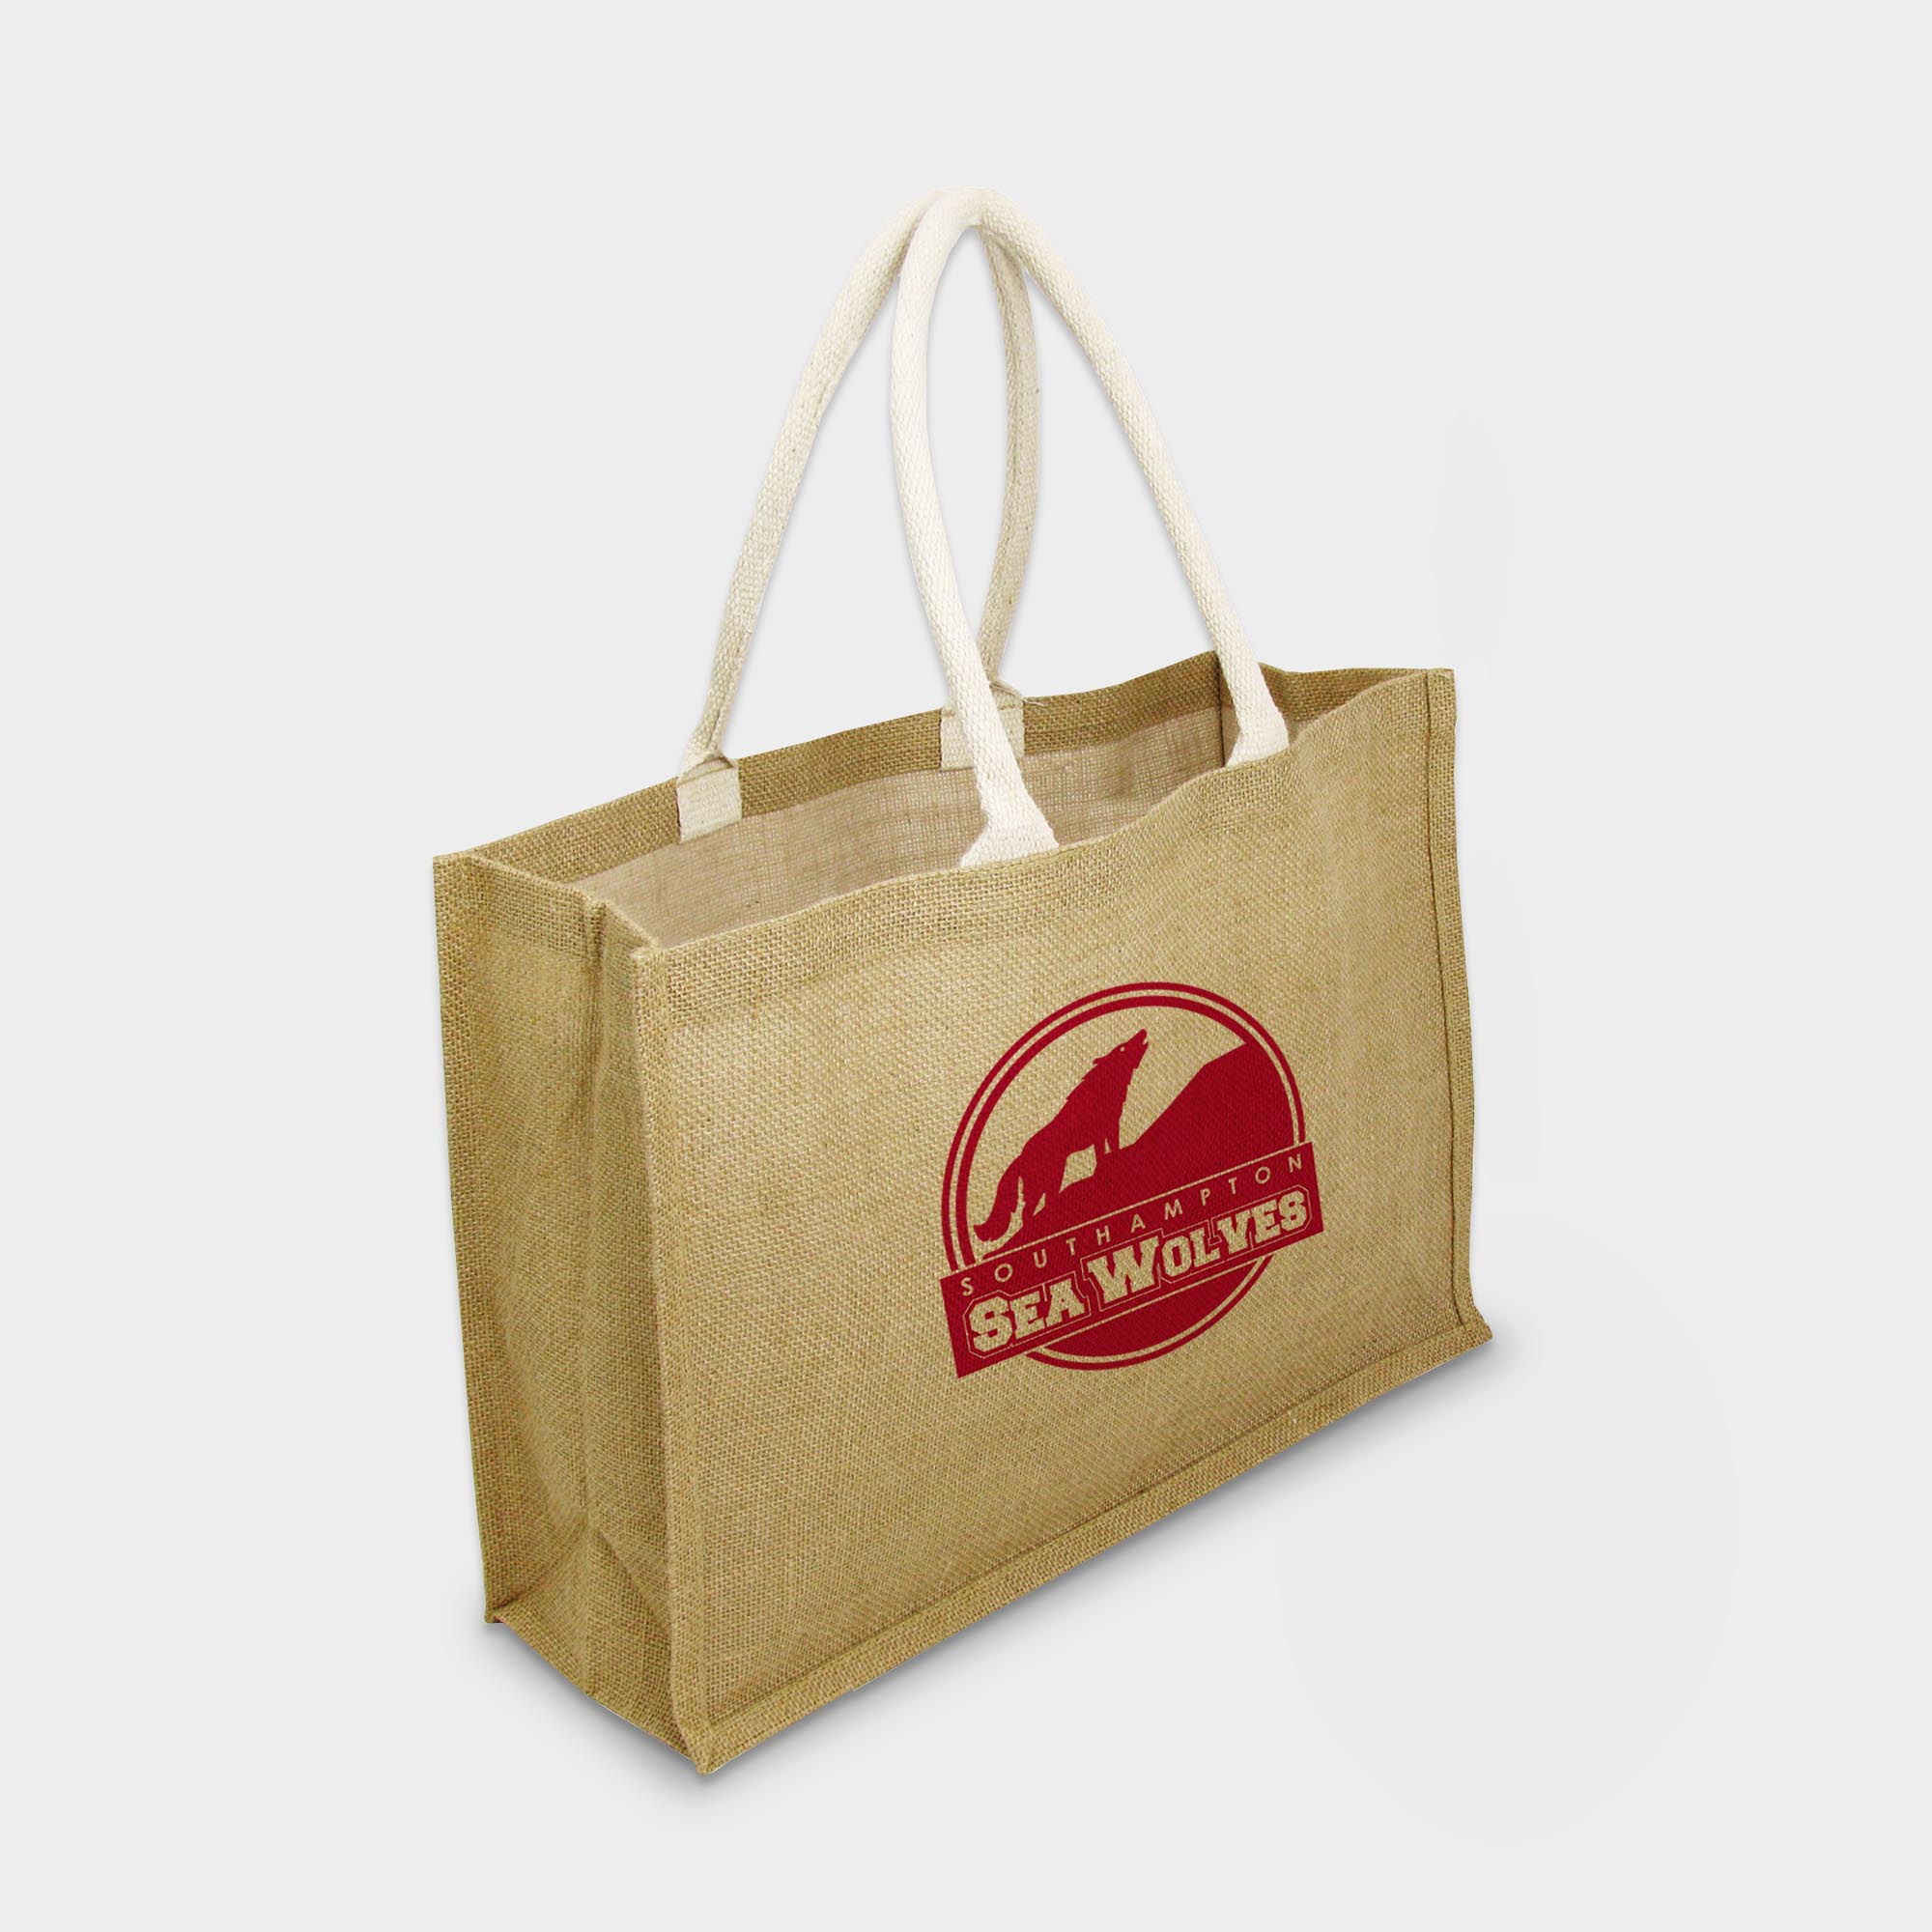 The Green & Good York Jute Bag is made using sustainable jute. Large Landscape design with deluxe handles made from cotton over rope. The inside of the bag is laminated for easy cleaning and additional sturdiness.